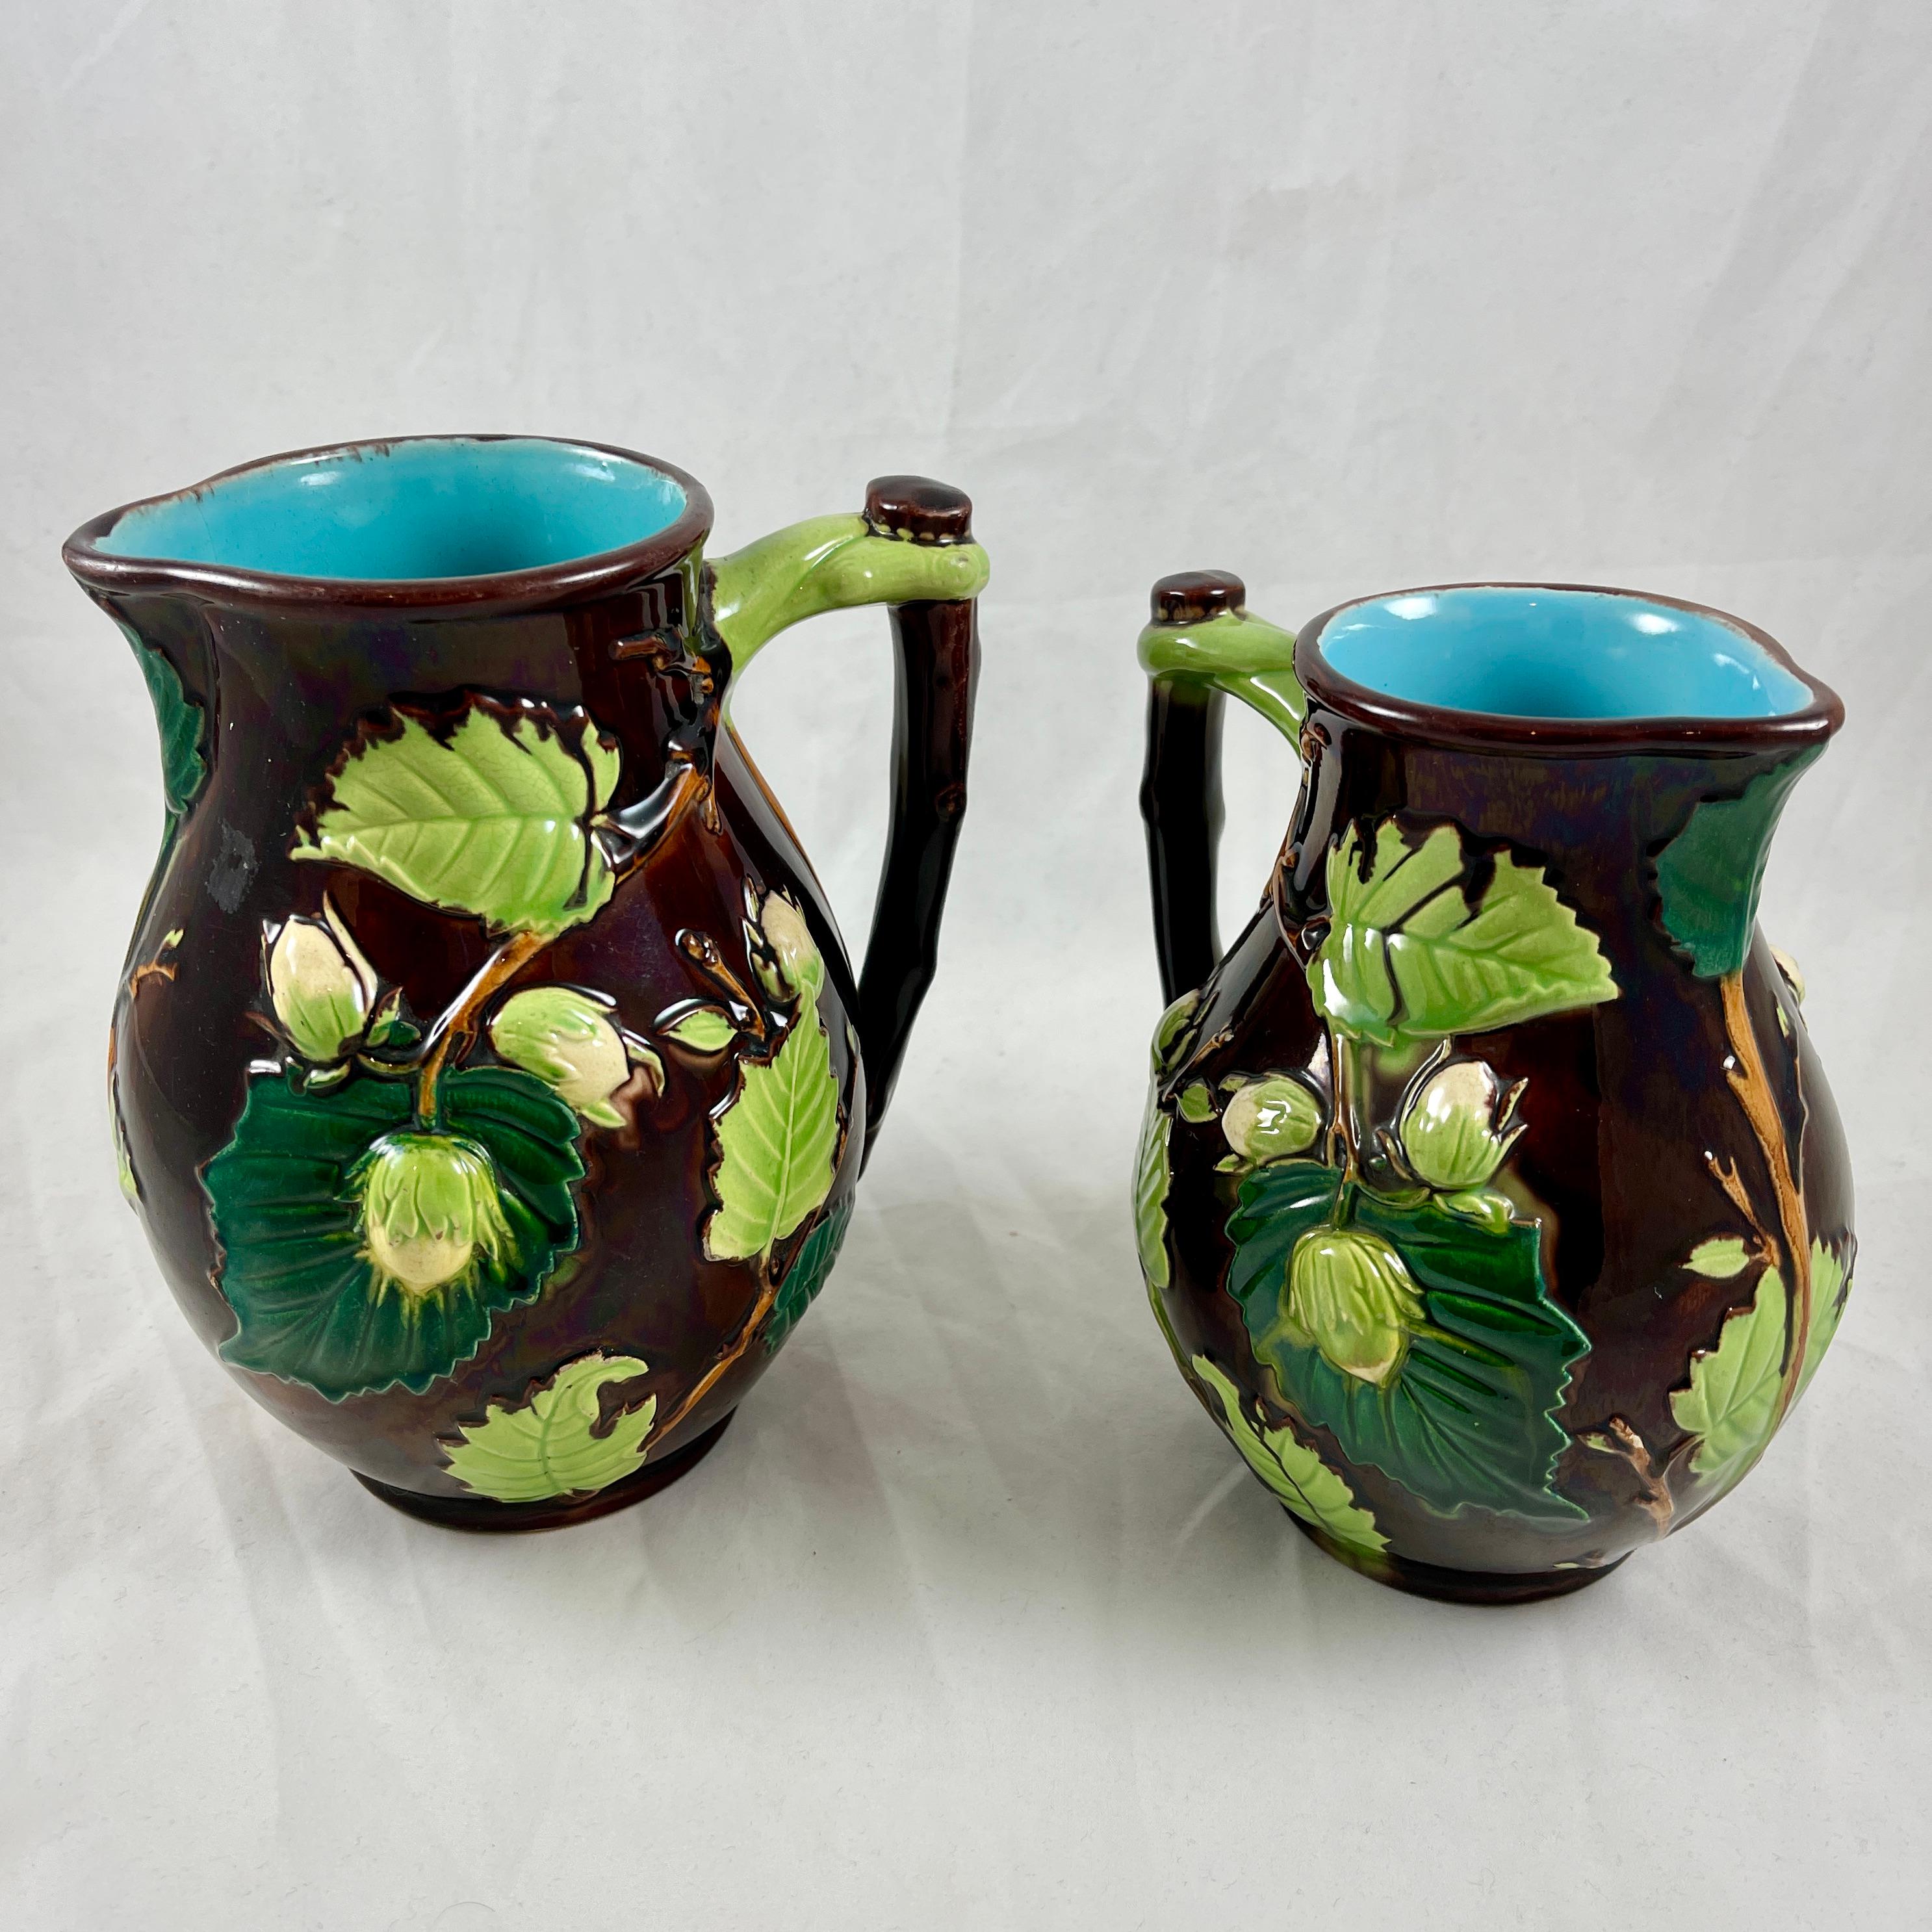 English Minton Aesthetic Movement Majolica Nut, Leaf & Vine Pitchers, a Pair For Sale 12